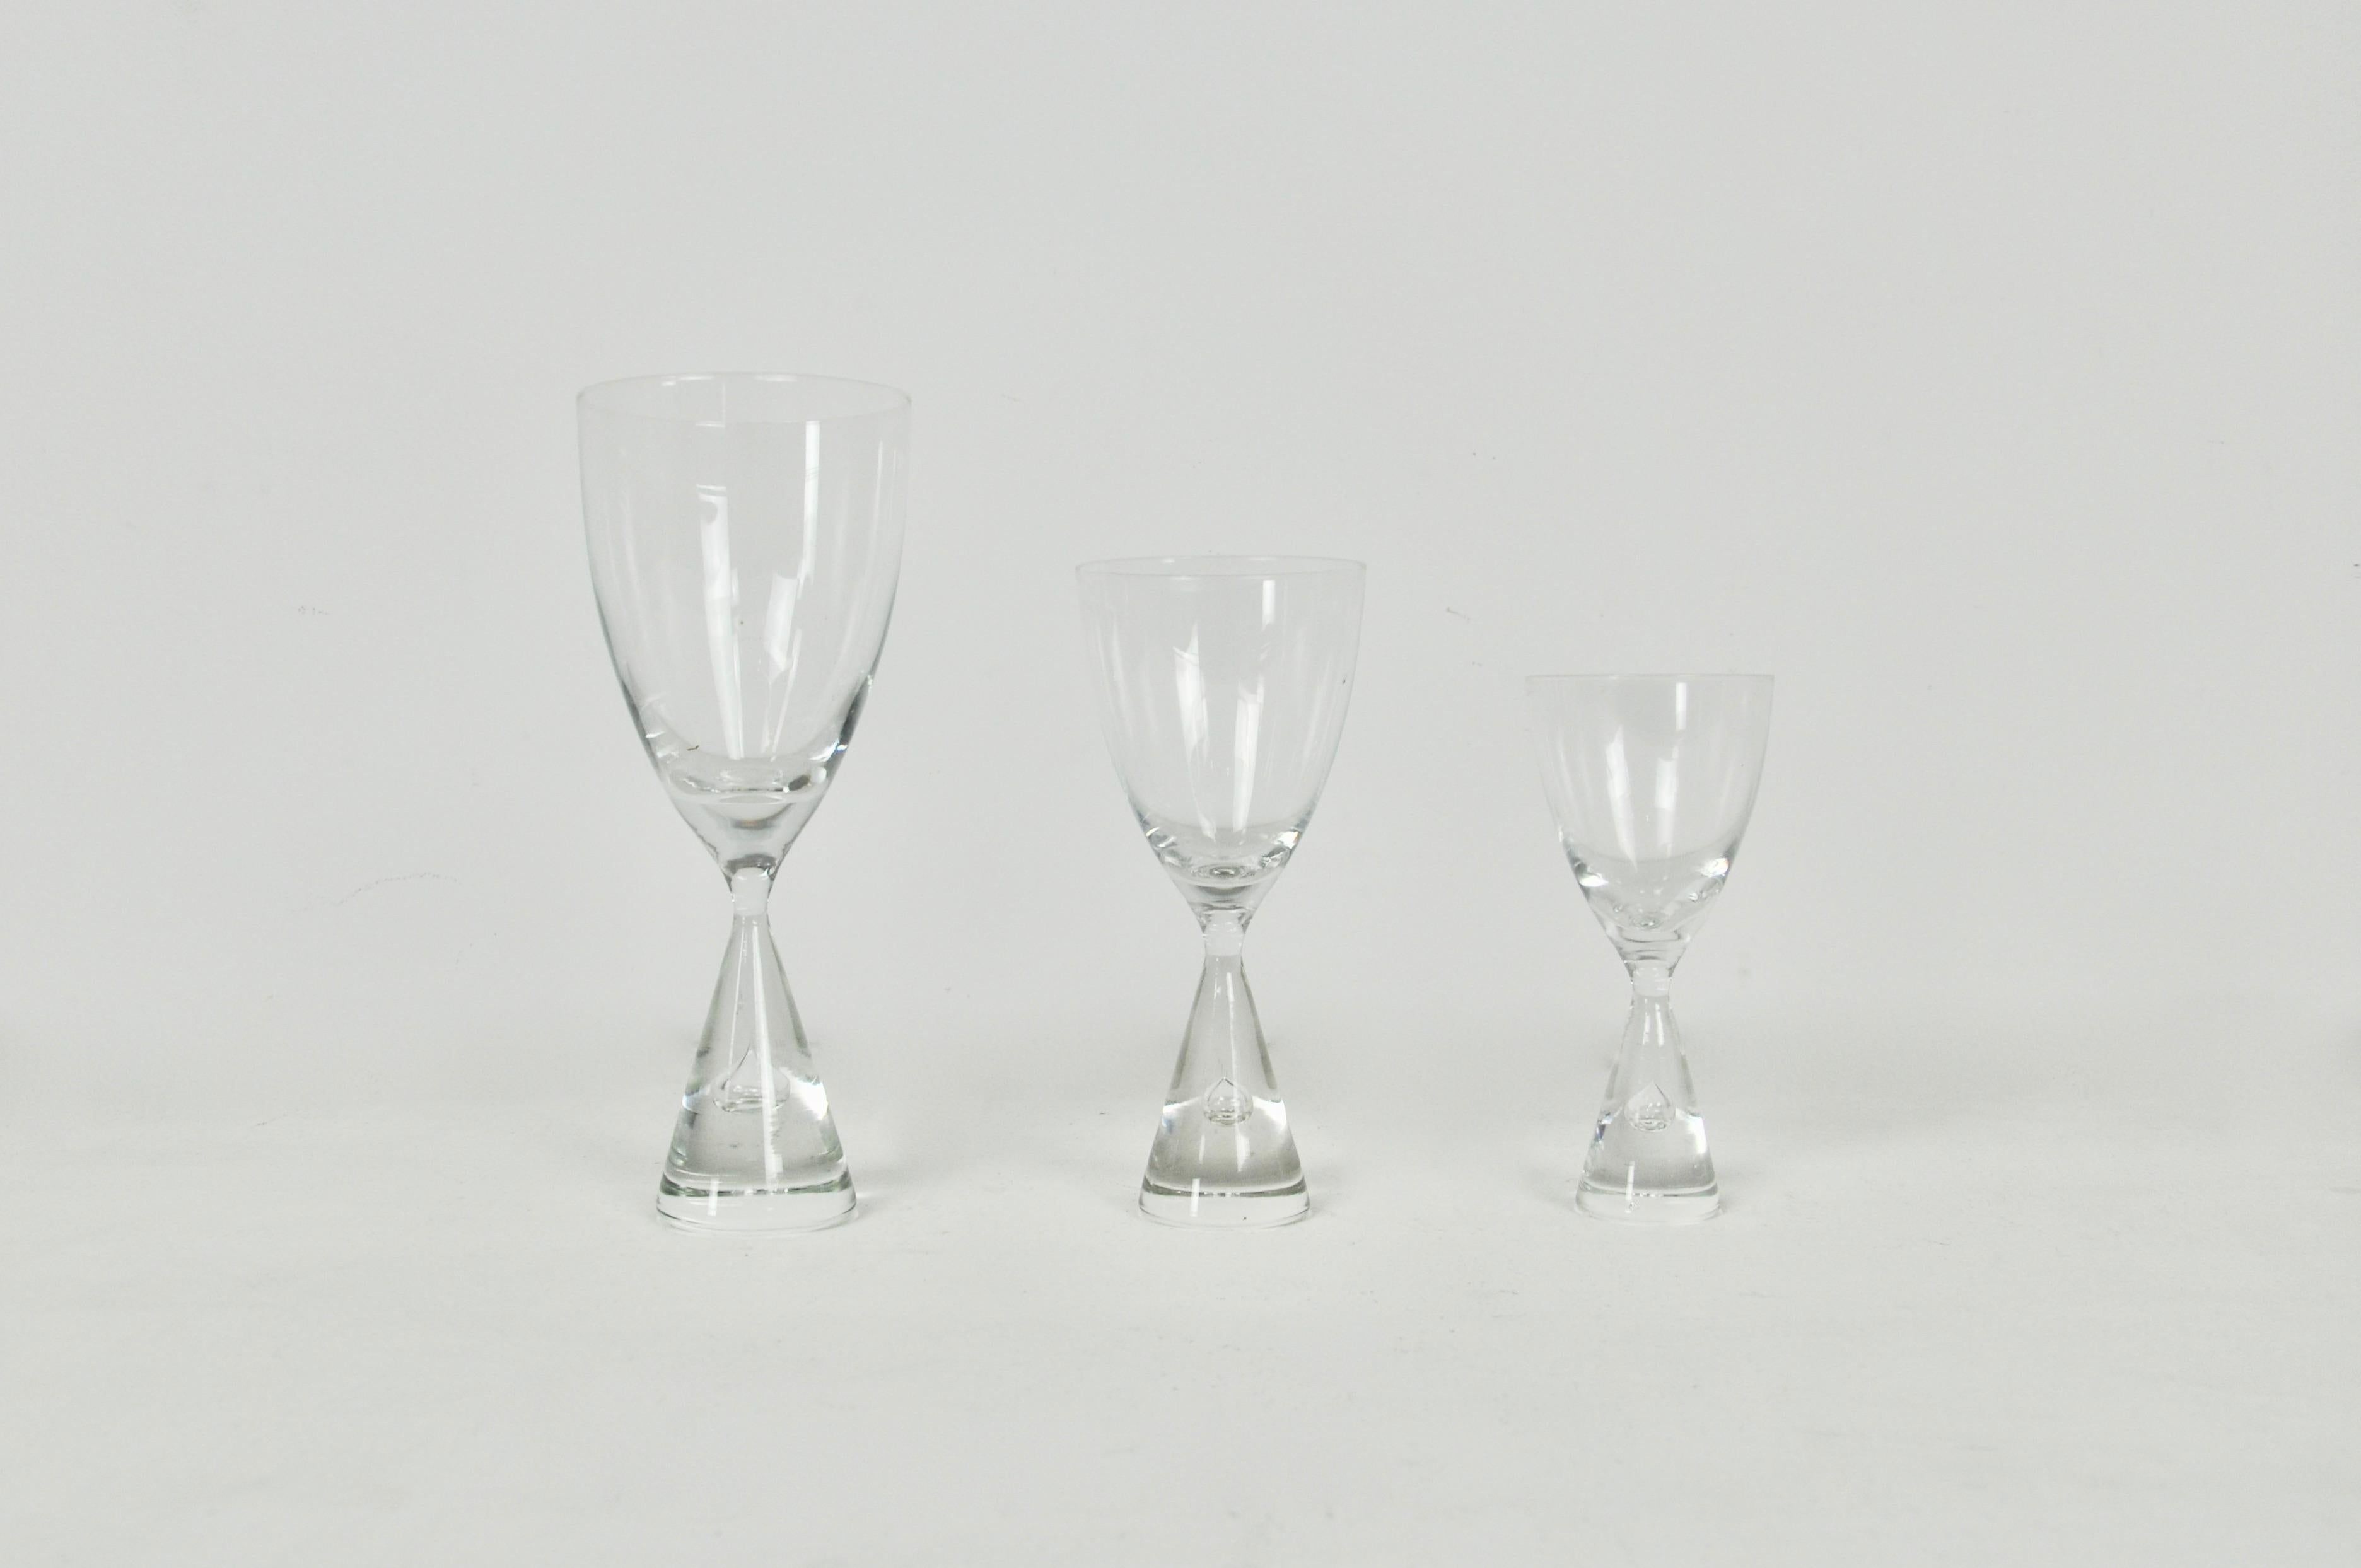 Series of 25 glasses, 3 dimensions
Large: Height 21cm, diameter 8.5cm, medium: 17cm, diameter 7cm, small: height 14cm, diameter 6cm. Wear and tear due to time and the age of the glasses.